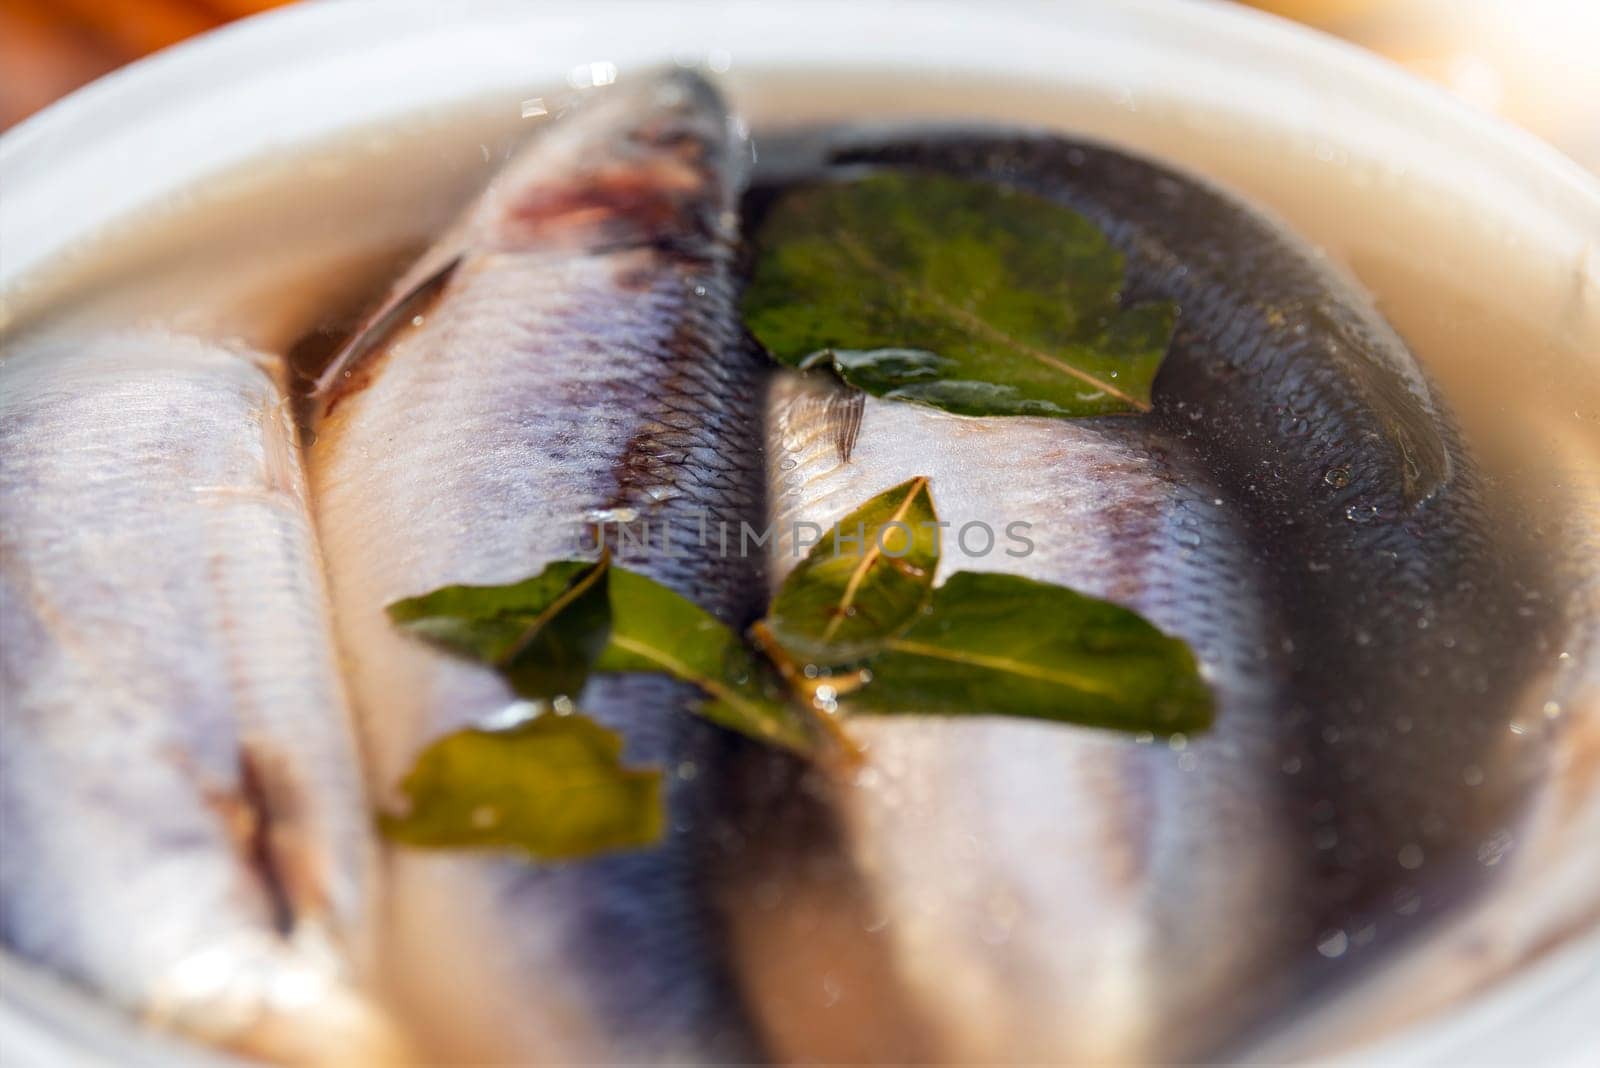 The process of salting or pickling herring. Large herrings are salted in a marinade with spices. High quality photo.